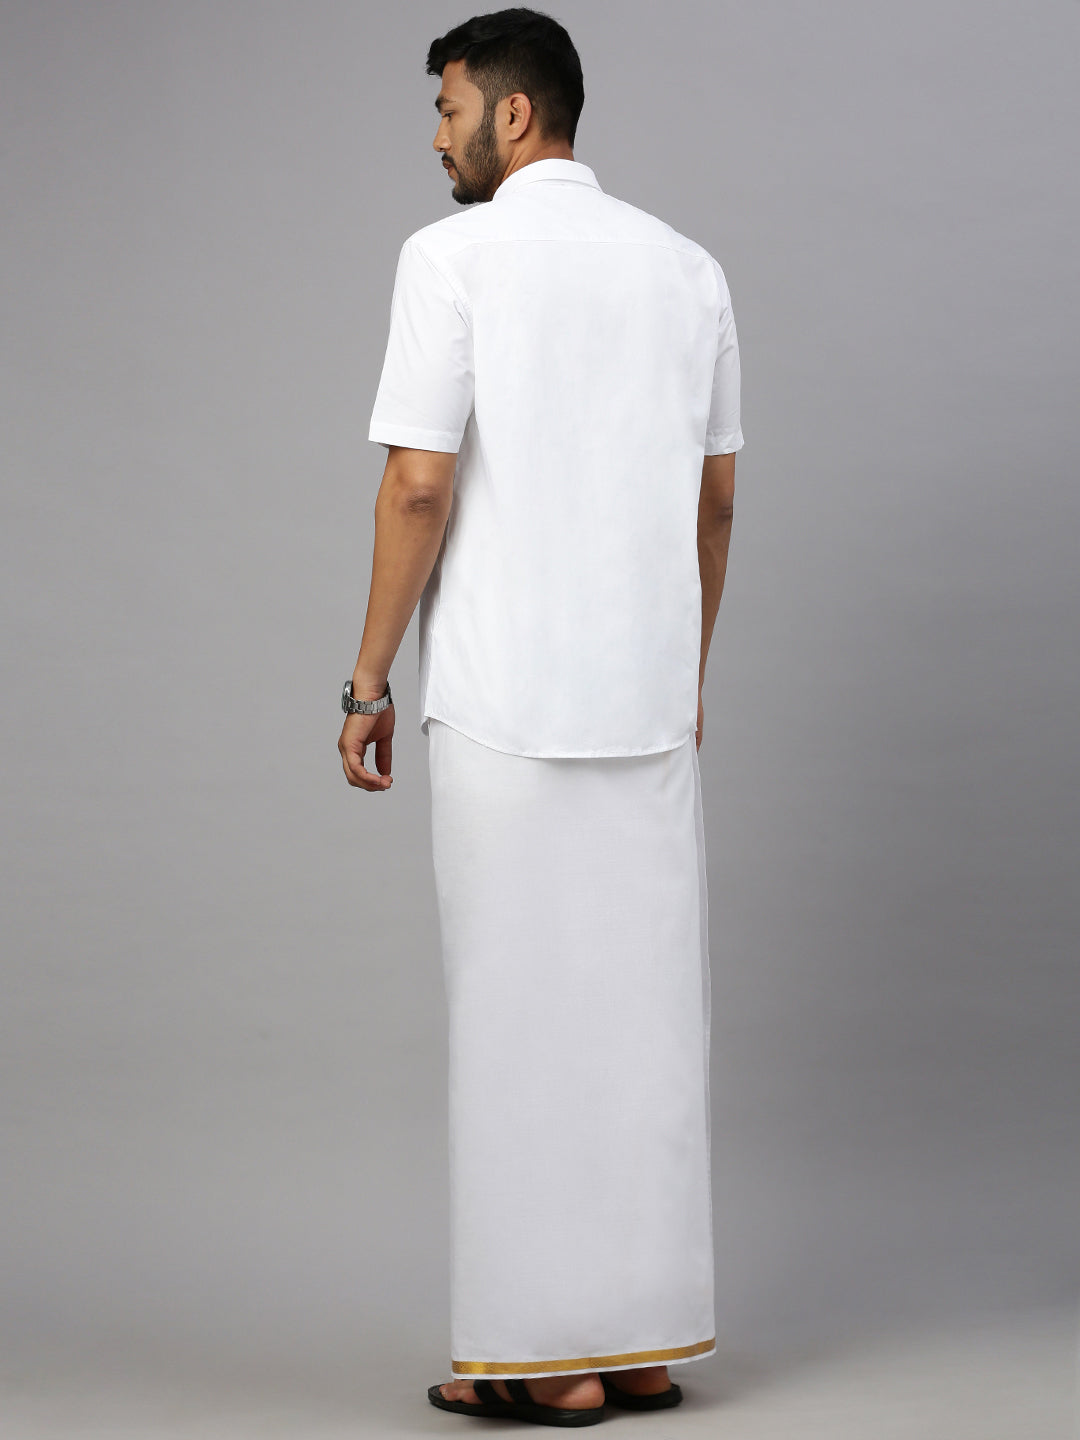 Mens Readymade Double Dhoti White with Gold Jari Border 708